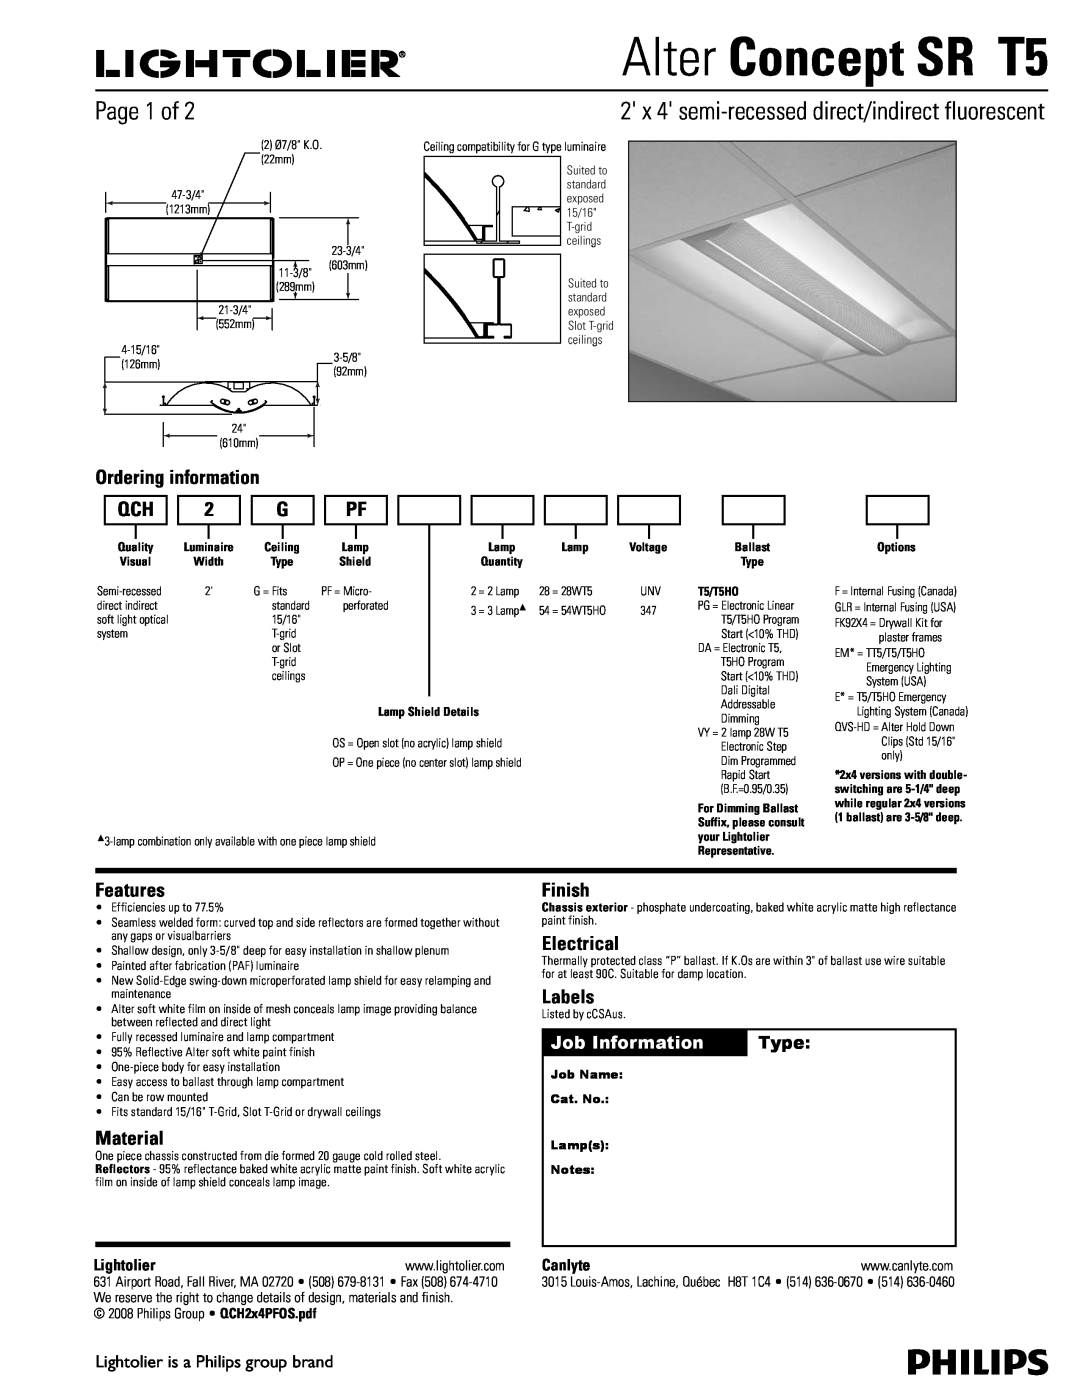 Lightolier Concept SR T5 manual Ordering information, Features, Material, Finish, Electrical, Labels, Job Information 